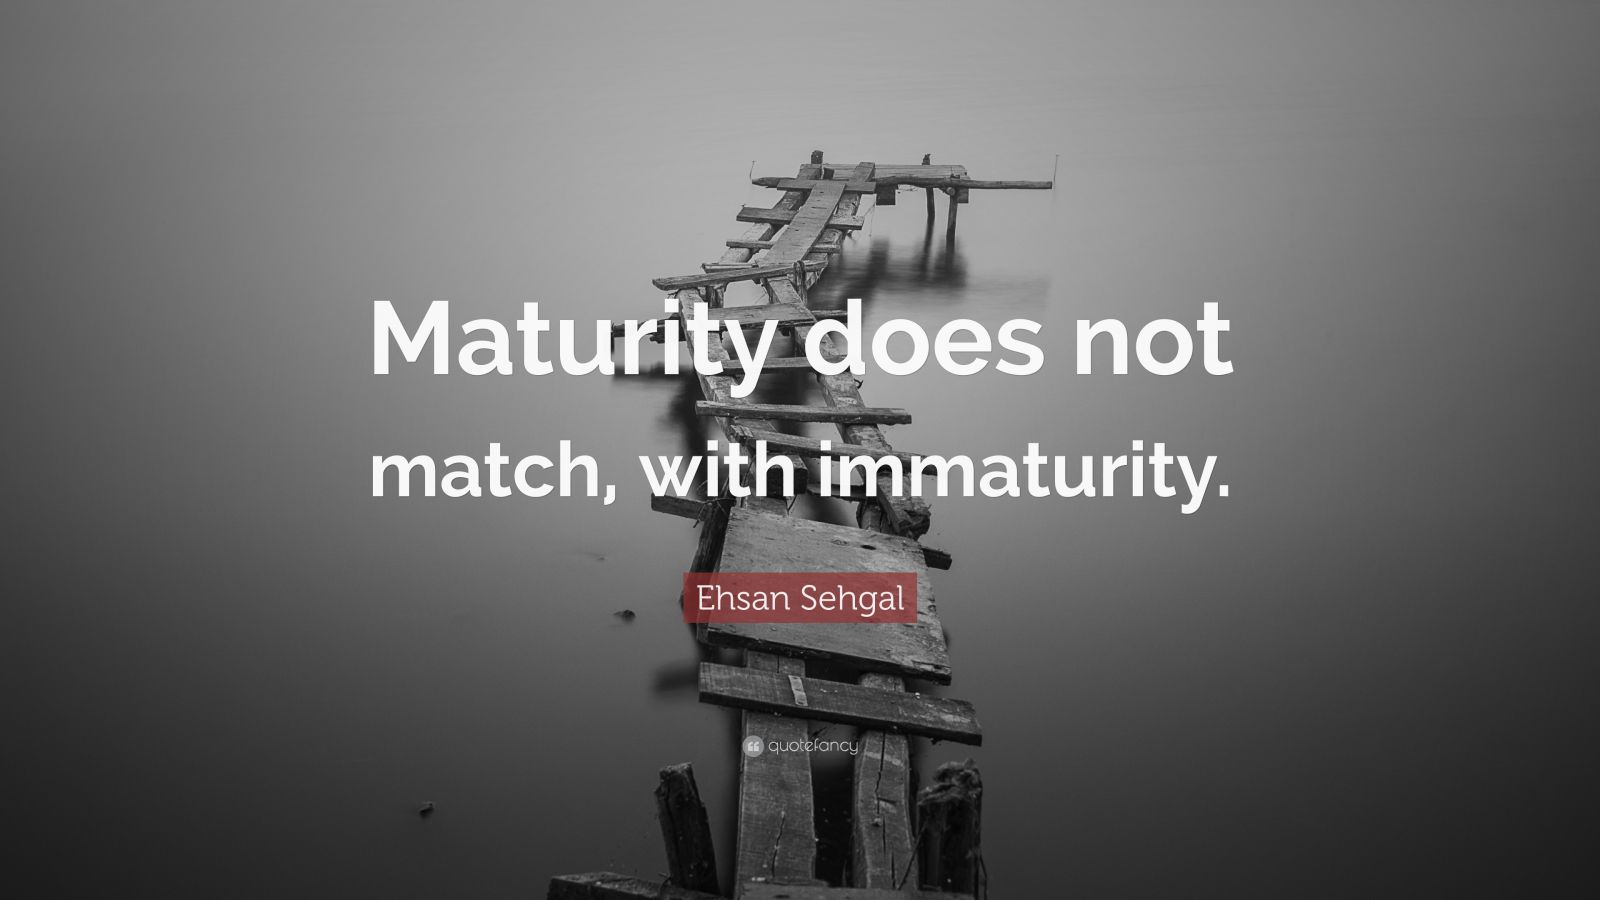 Ehsan Sehgal Quote “Maturity does not match, with immaturity.”